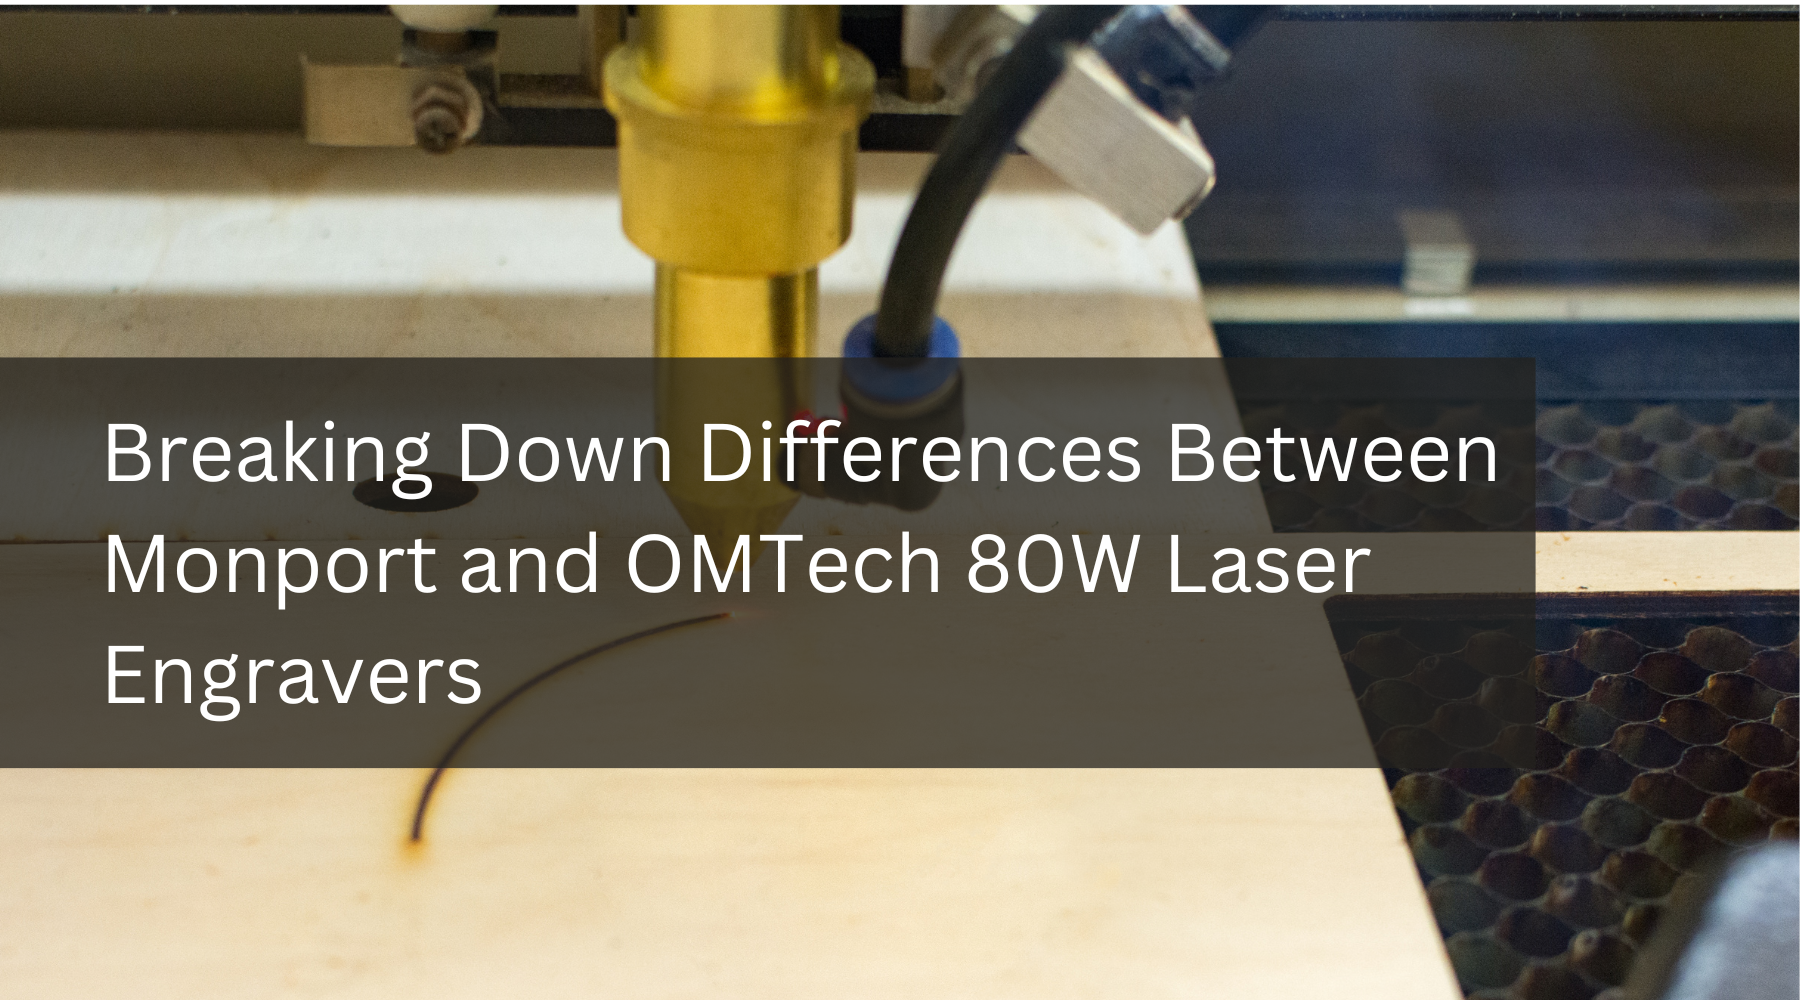 Breaking Down Differences Between Monport and OMTech 80W Laser Engravers